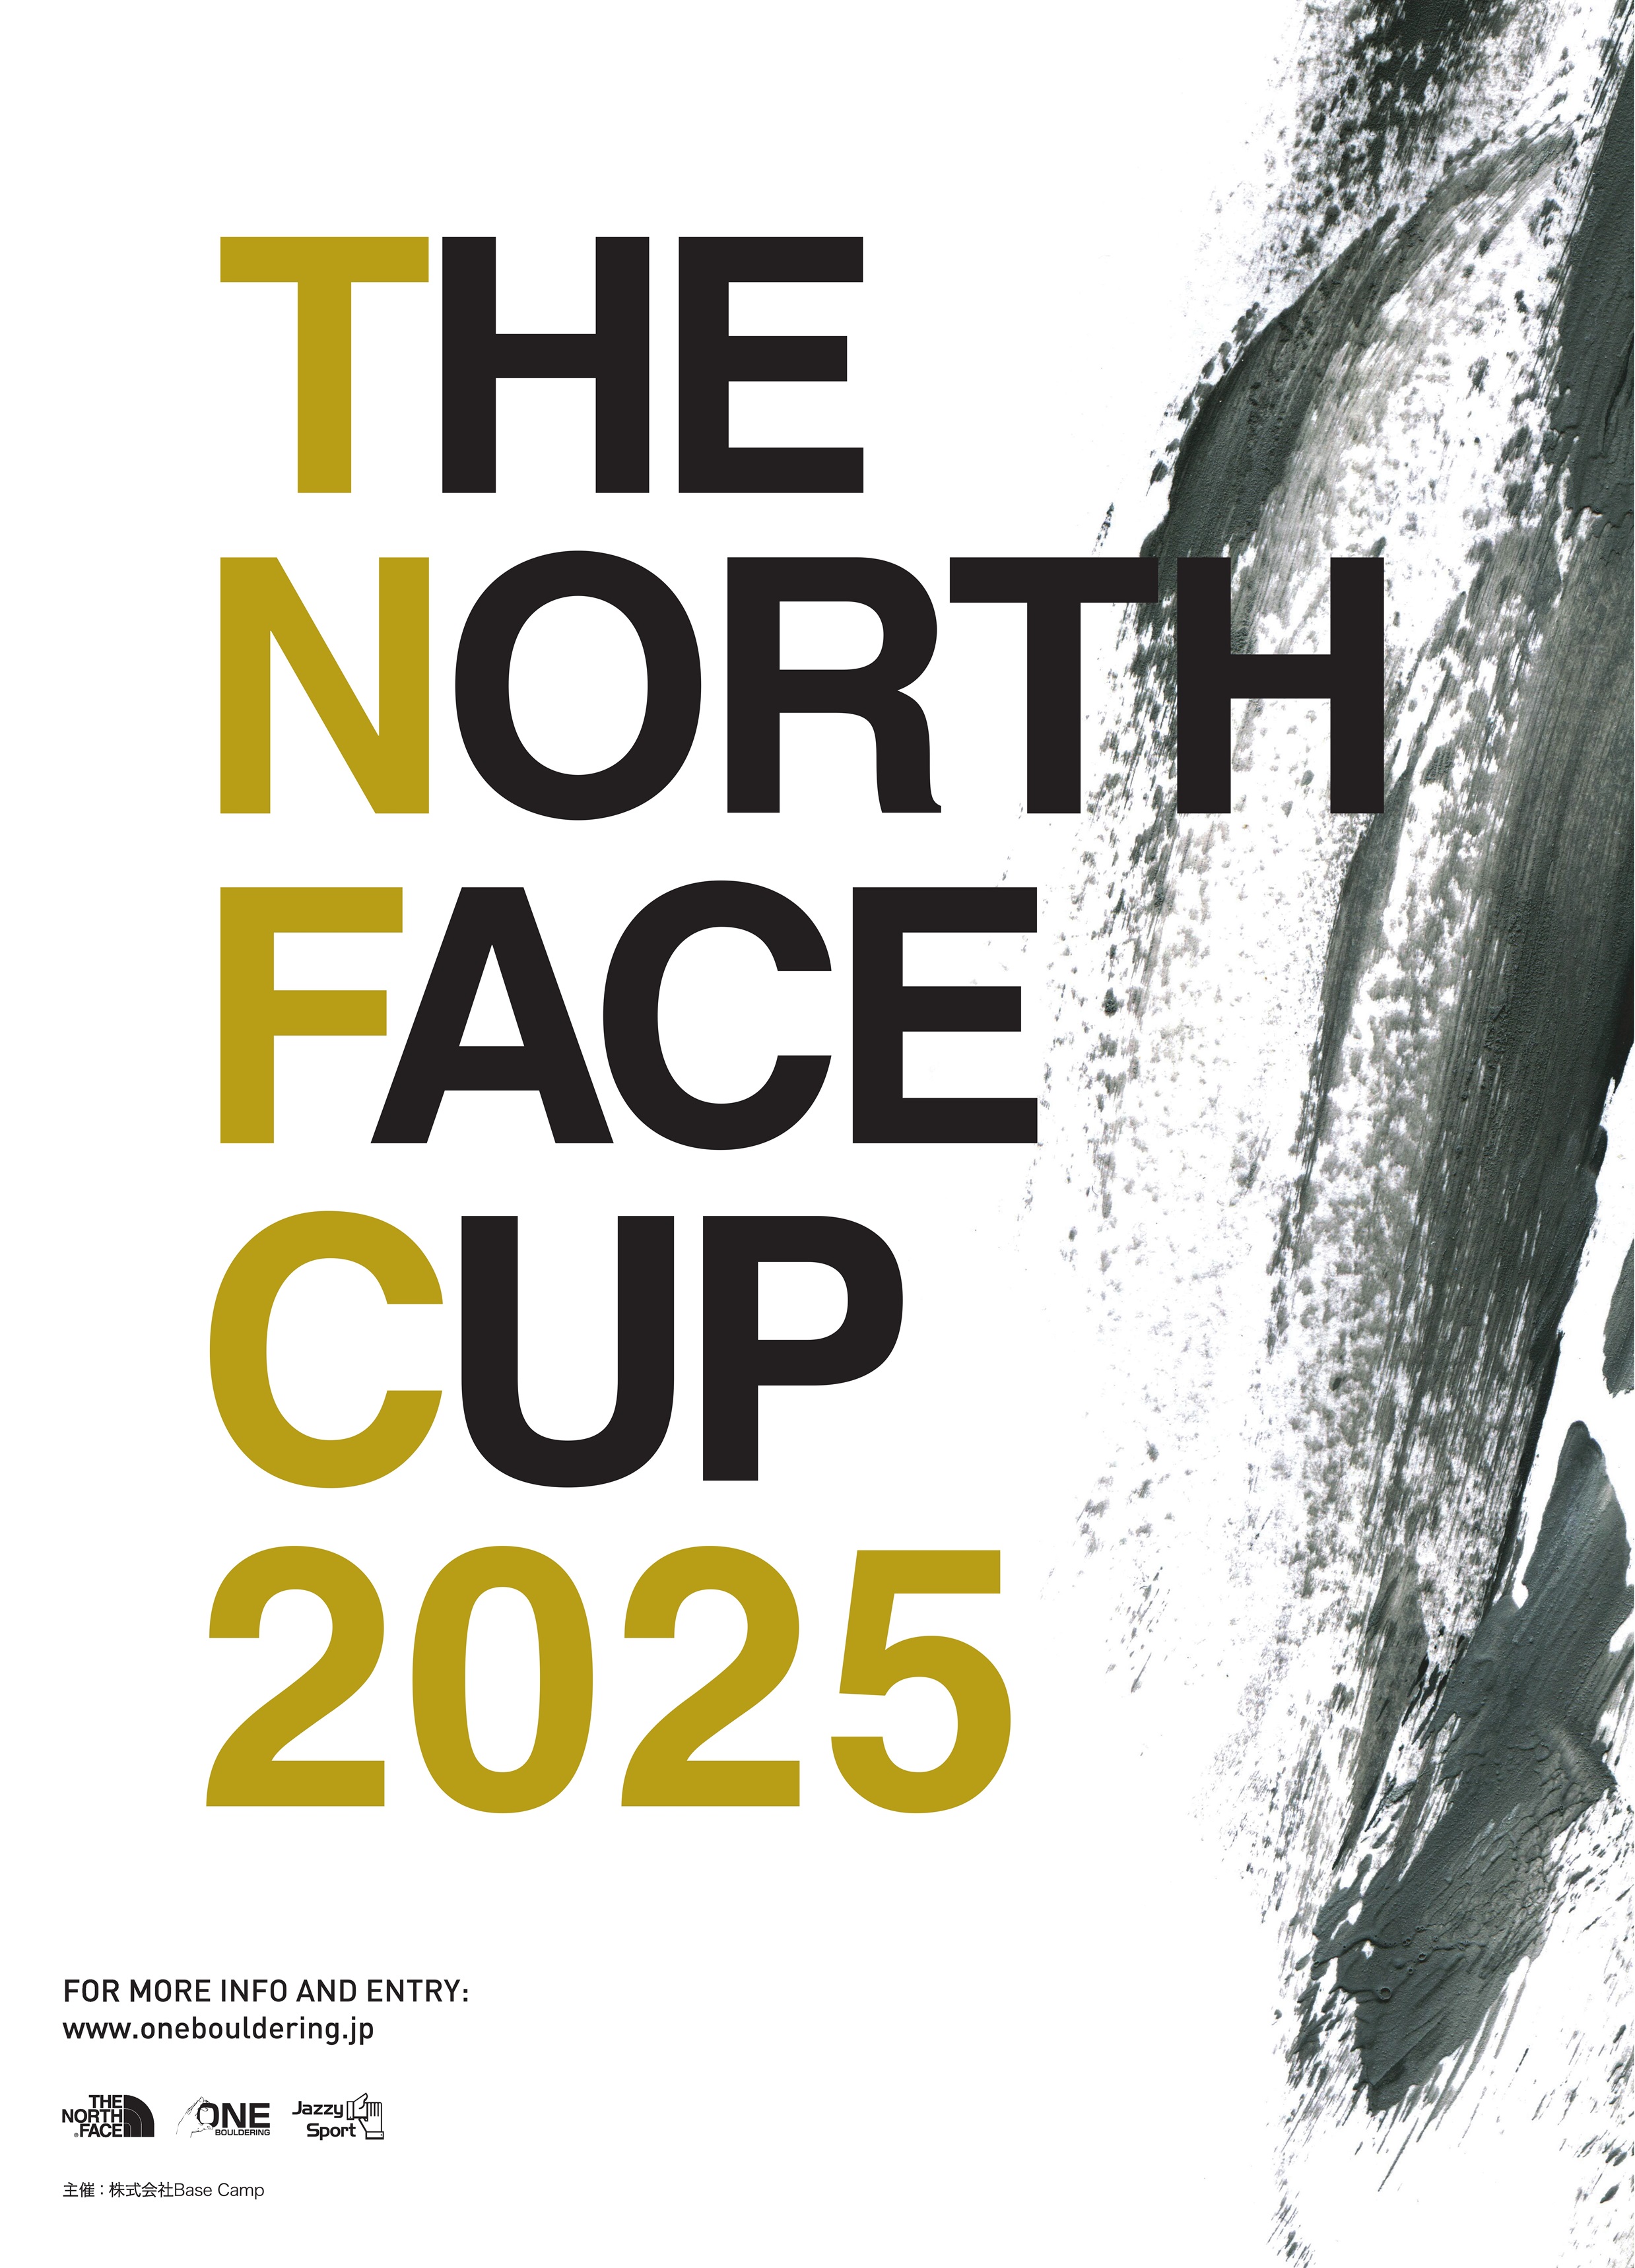 THE NORTH FACE CUP 2025